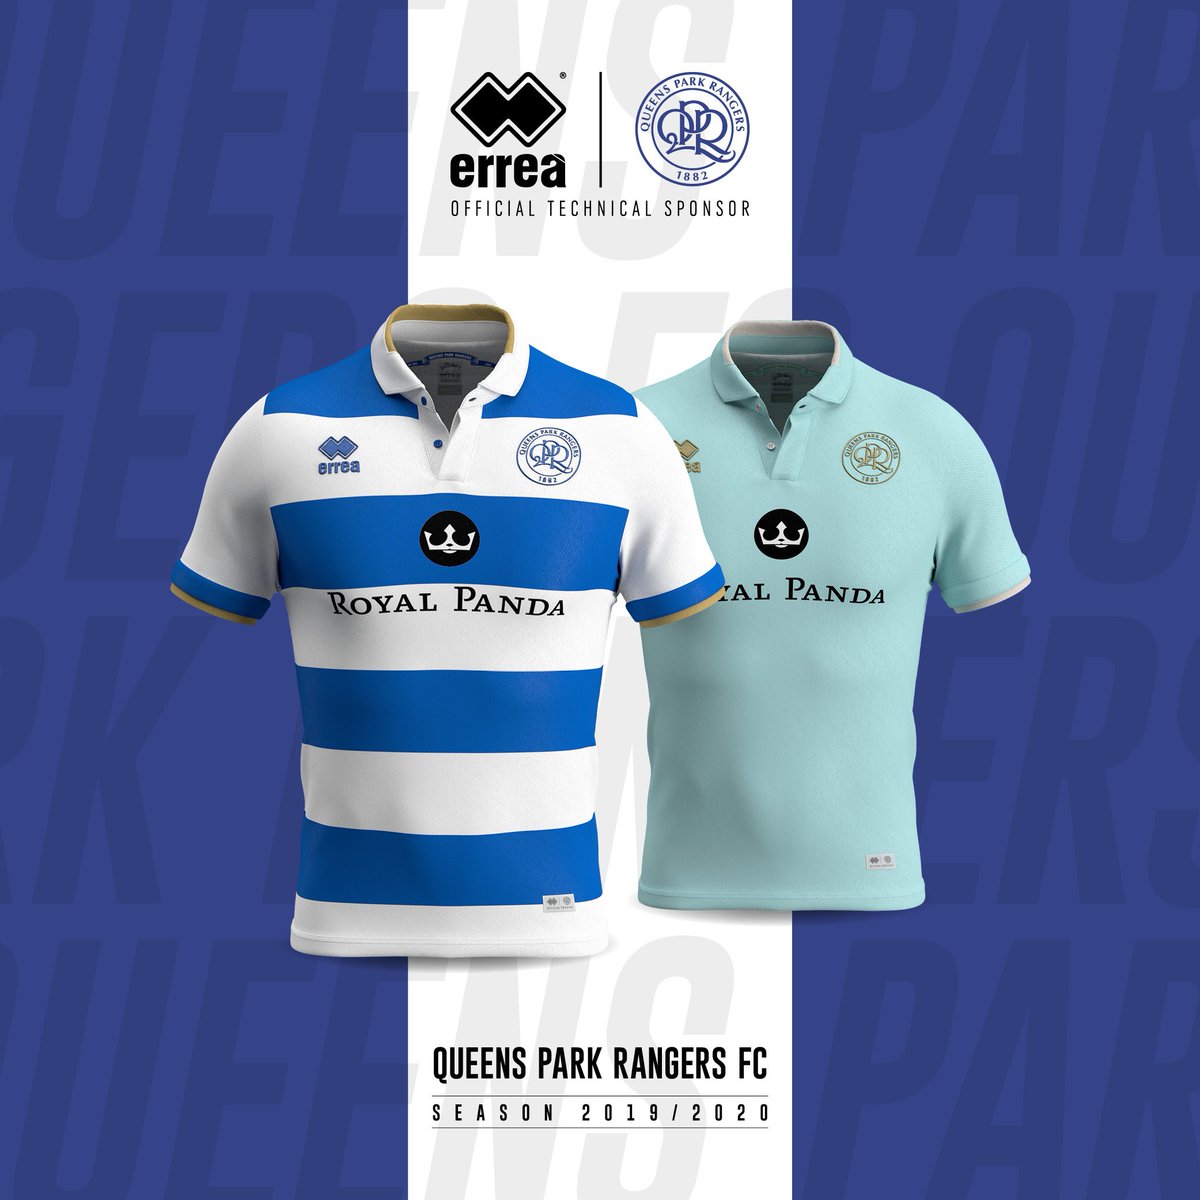 Errea Sport On Twitter The Home Shirt Suggests A Return To